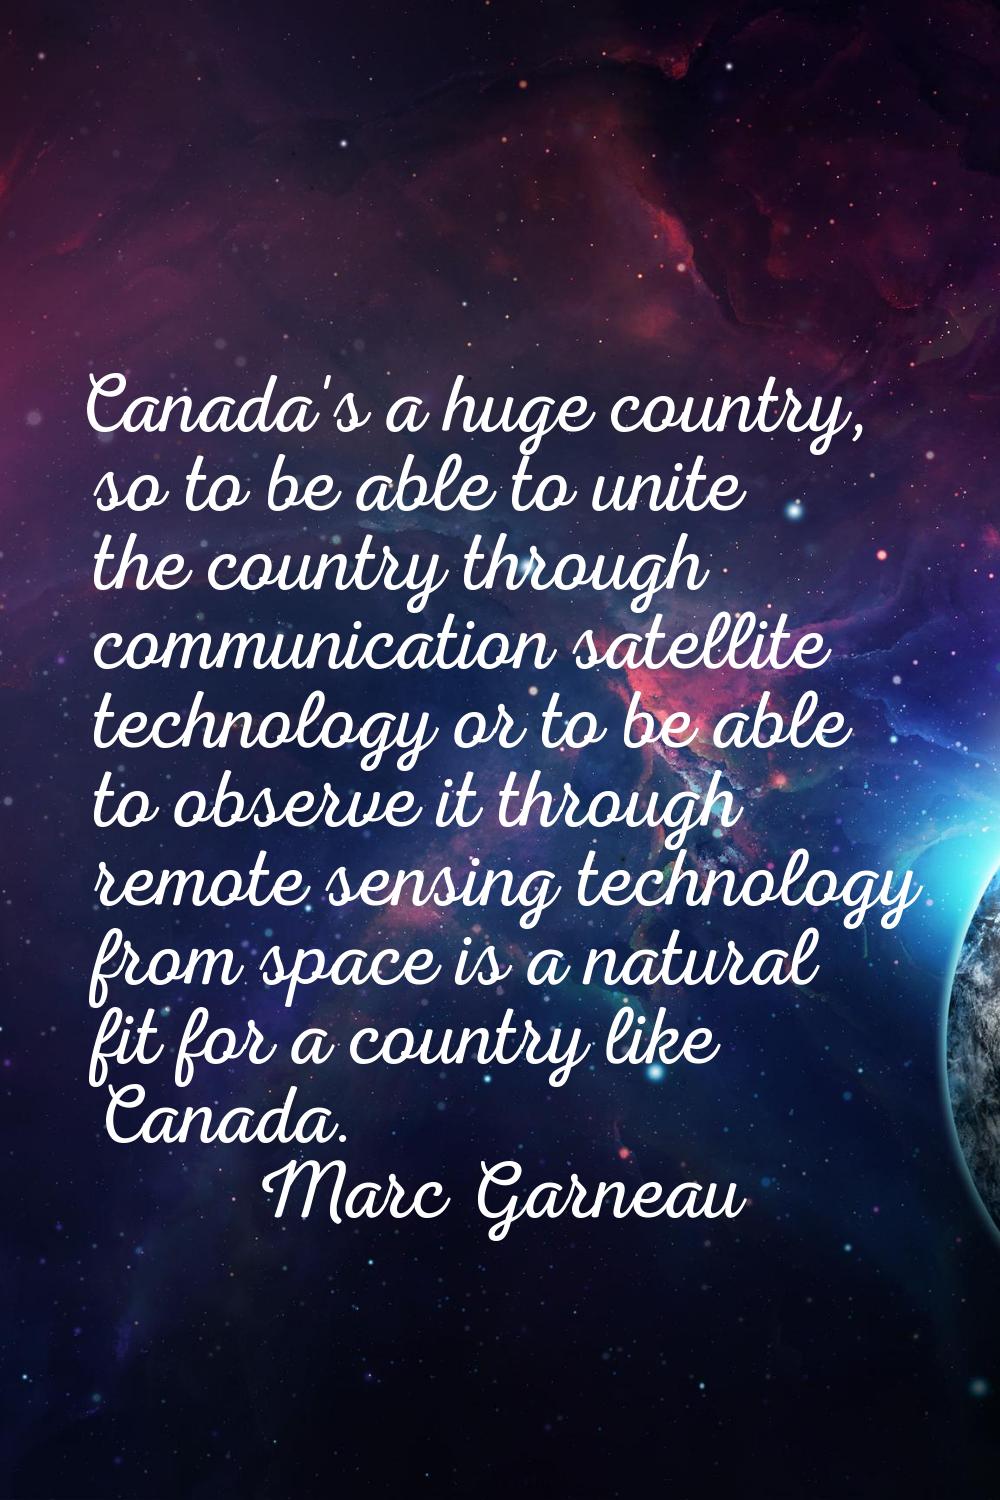 Canada's a huge country, so to be able to unite the country through communication satellite technol